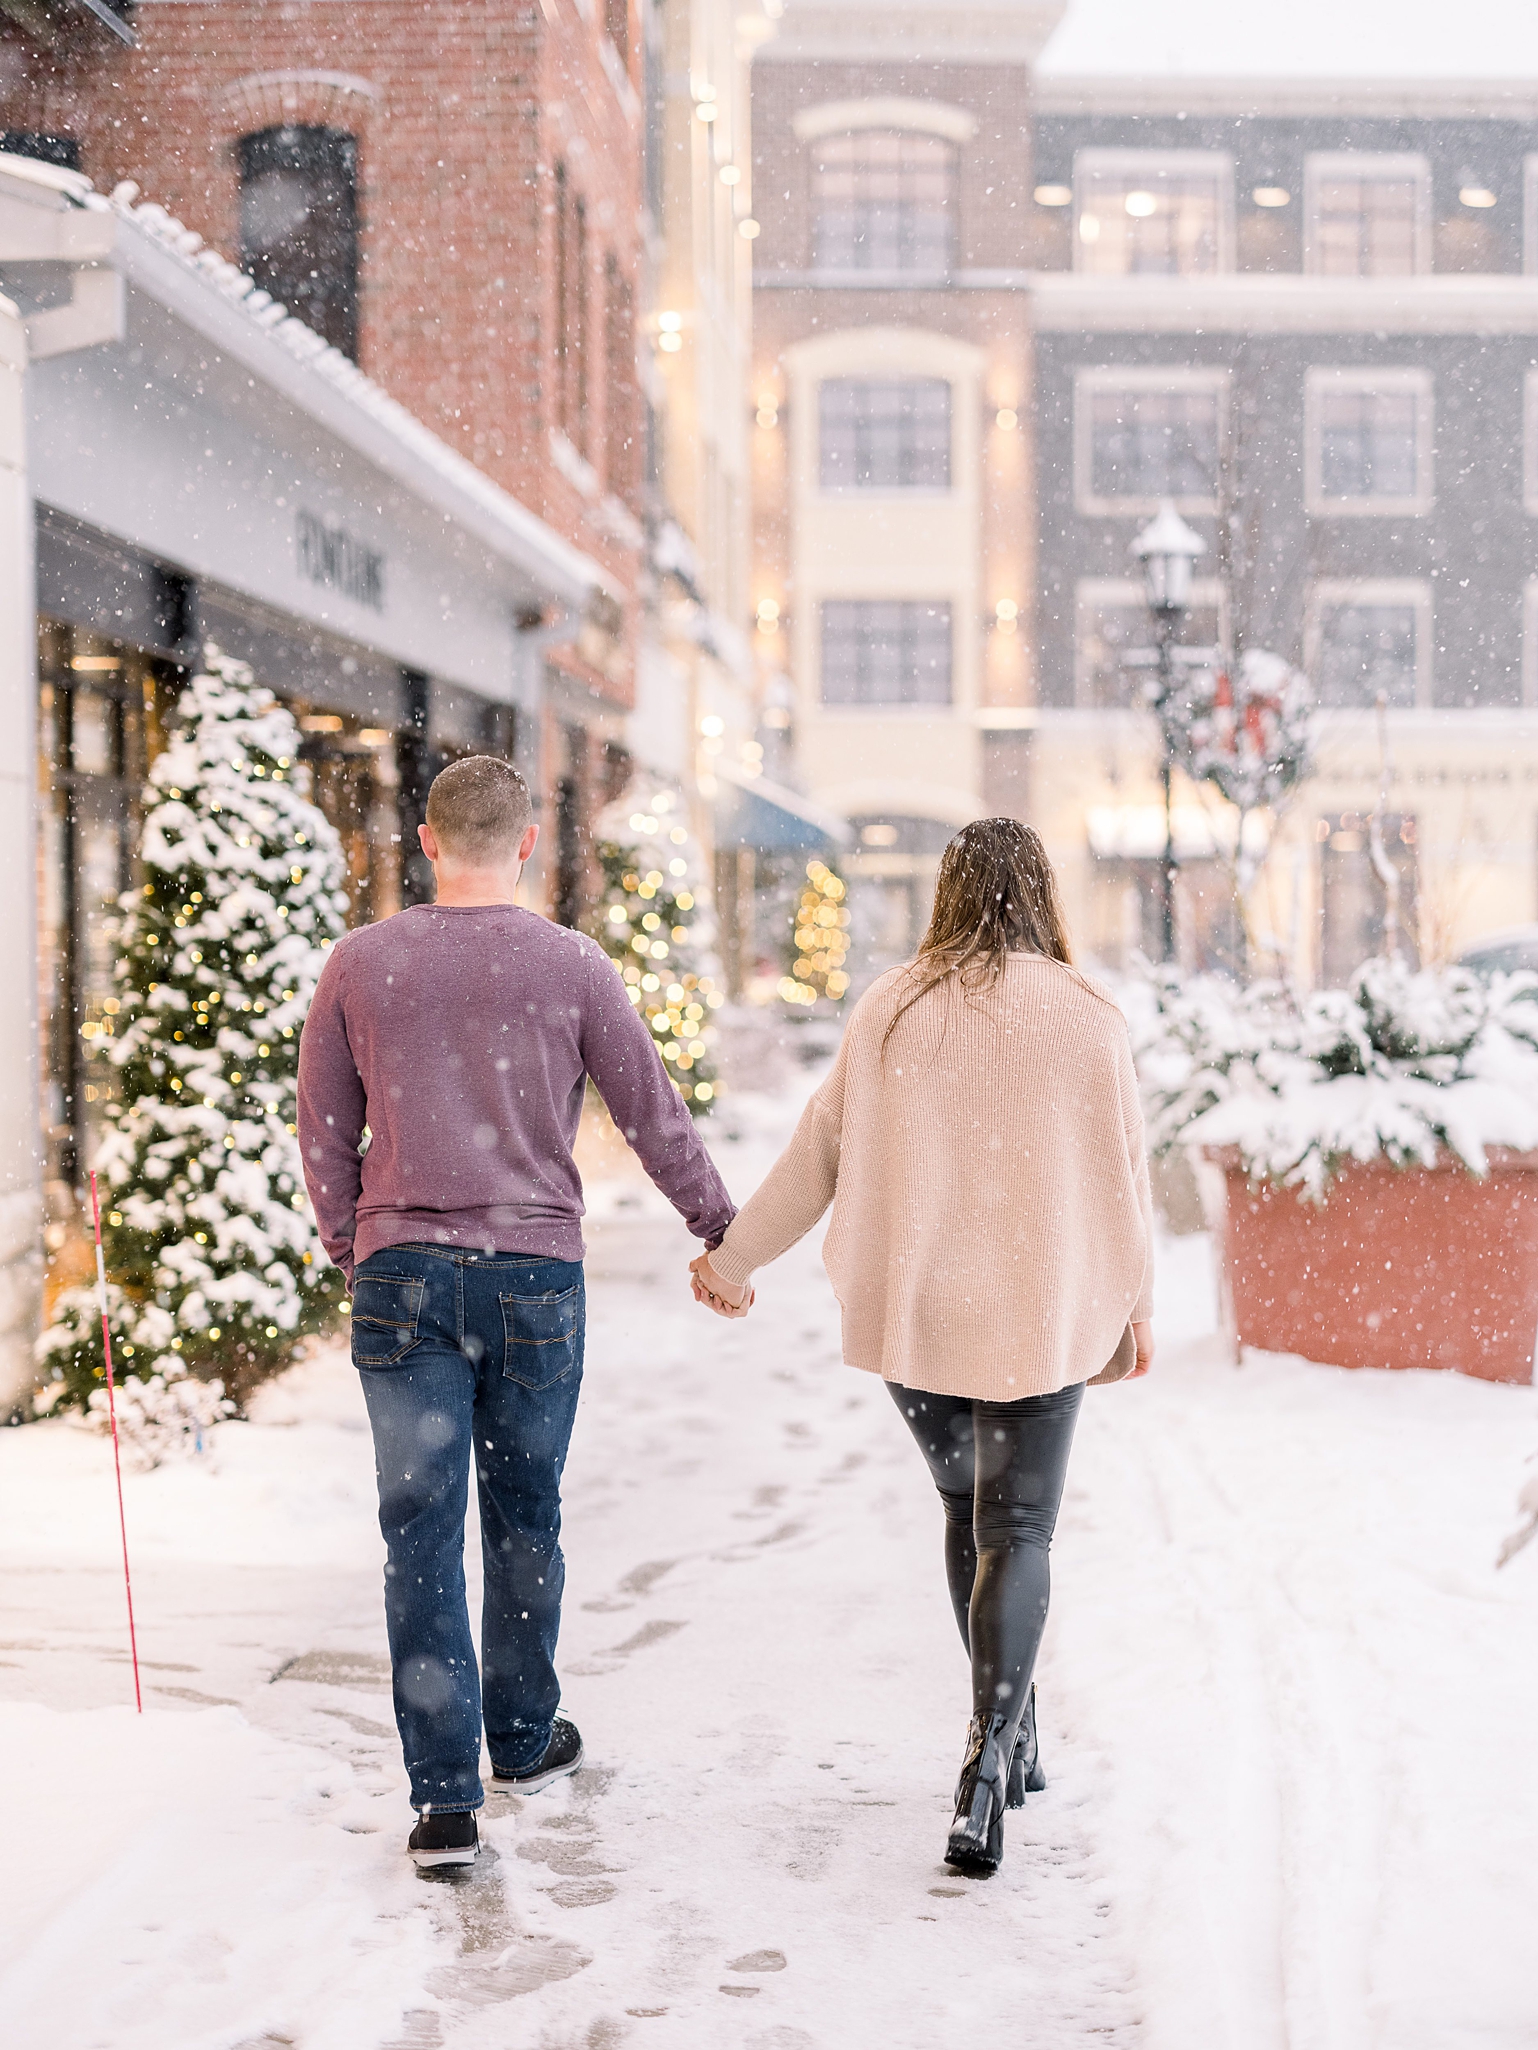 Downtown Middleton, WI Winter Engagement Session